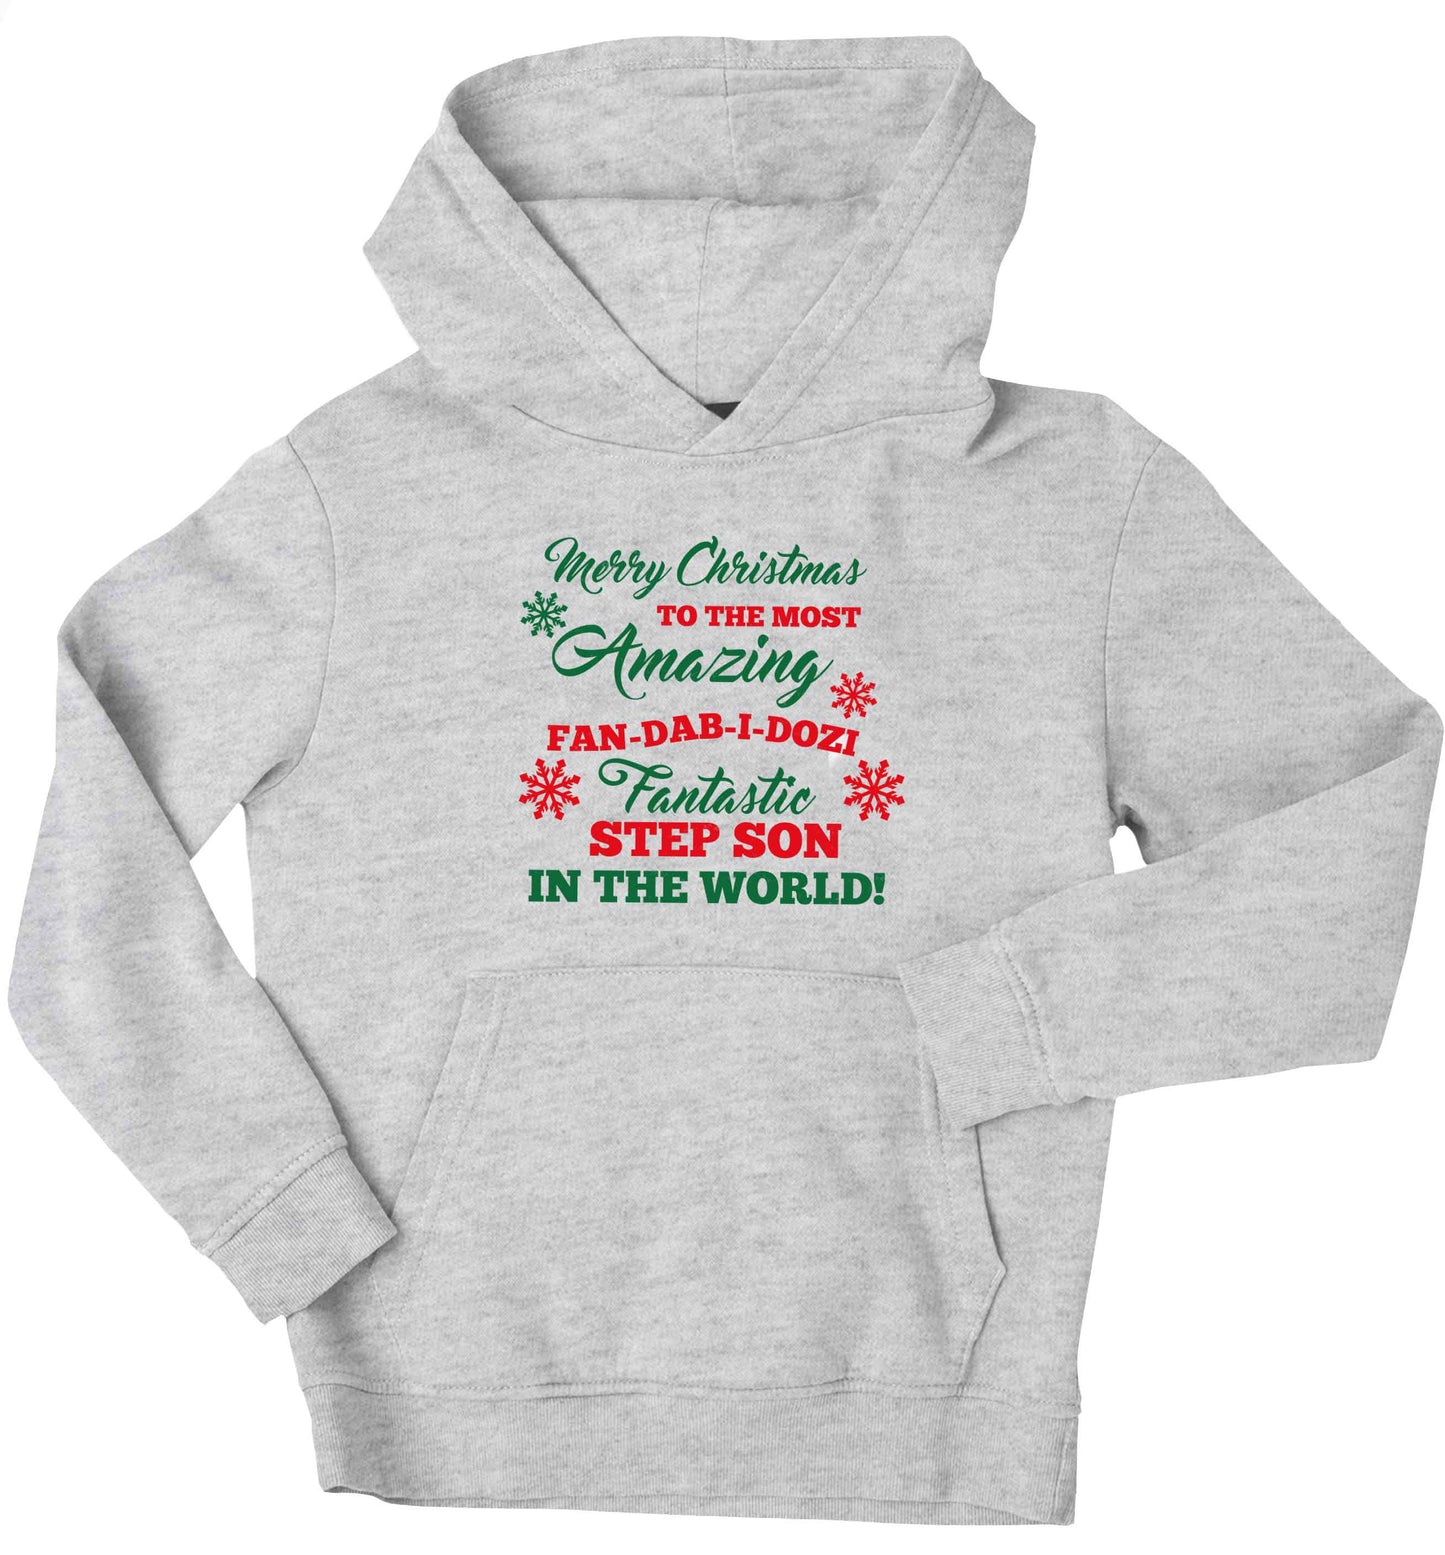 Merry Christmas to the most amazing fan-dab-i-dozi fantasic Step Son in the world children's grey hoodie 12-13 Years